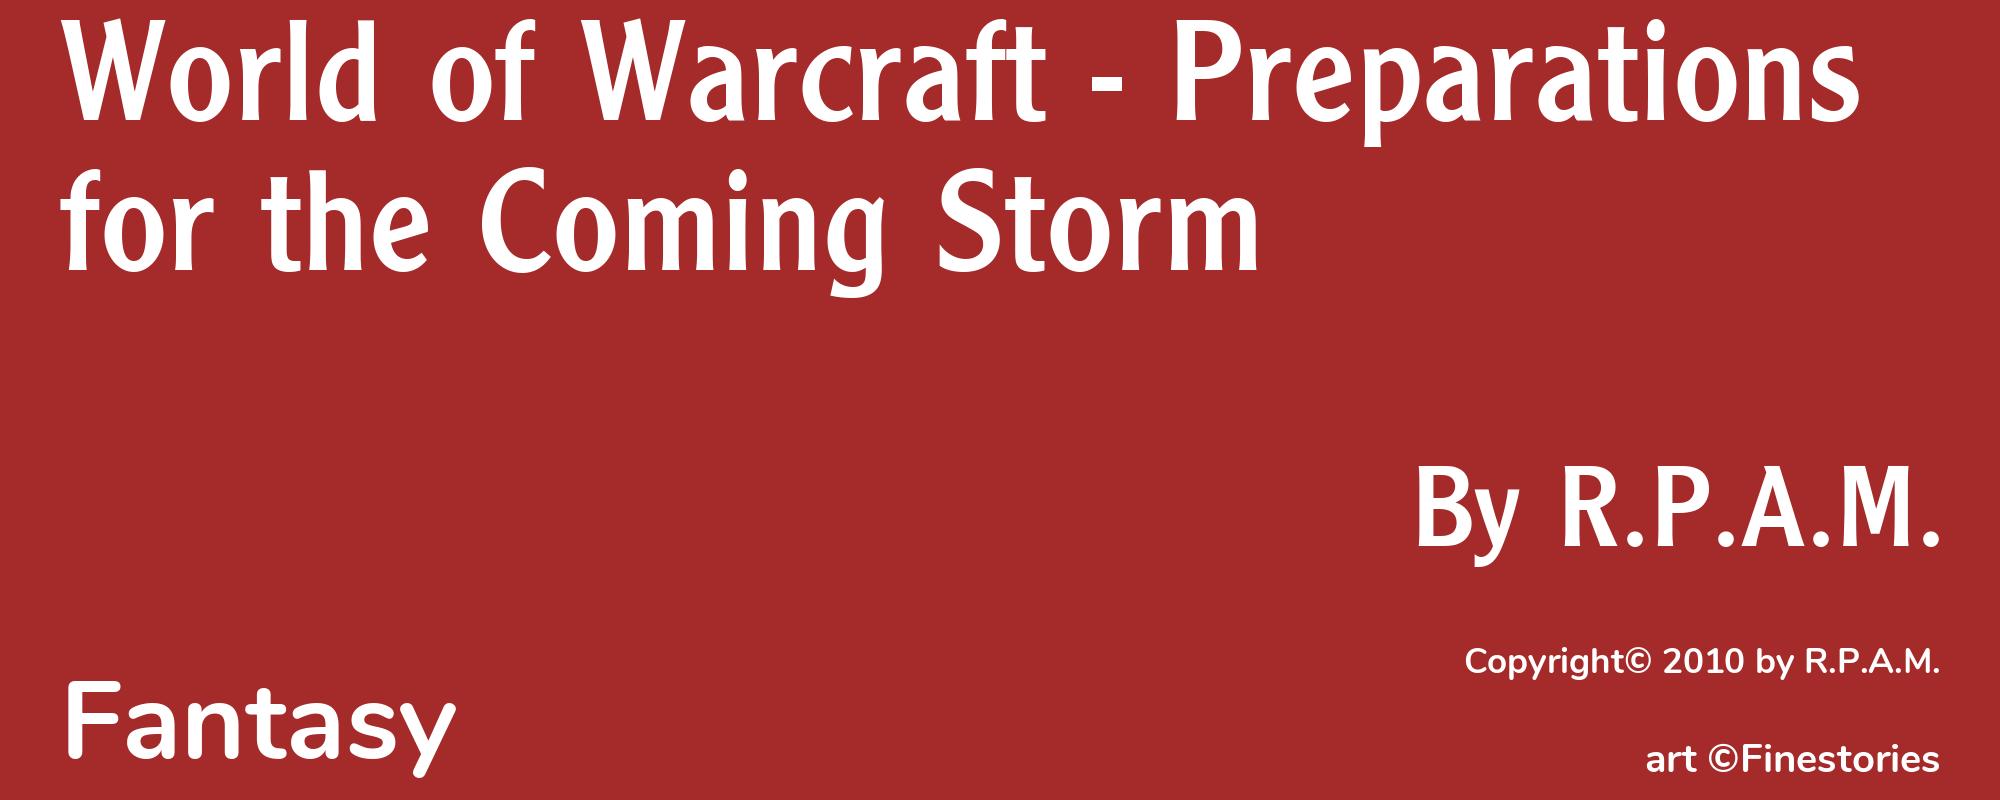 World of Warcraft - Preparations for the Coming Storm - Cover